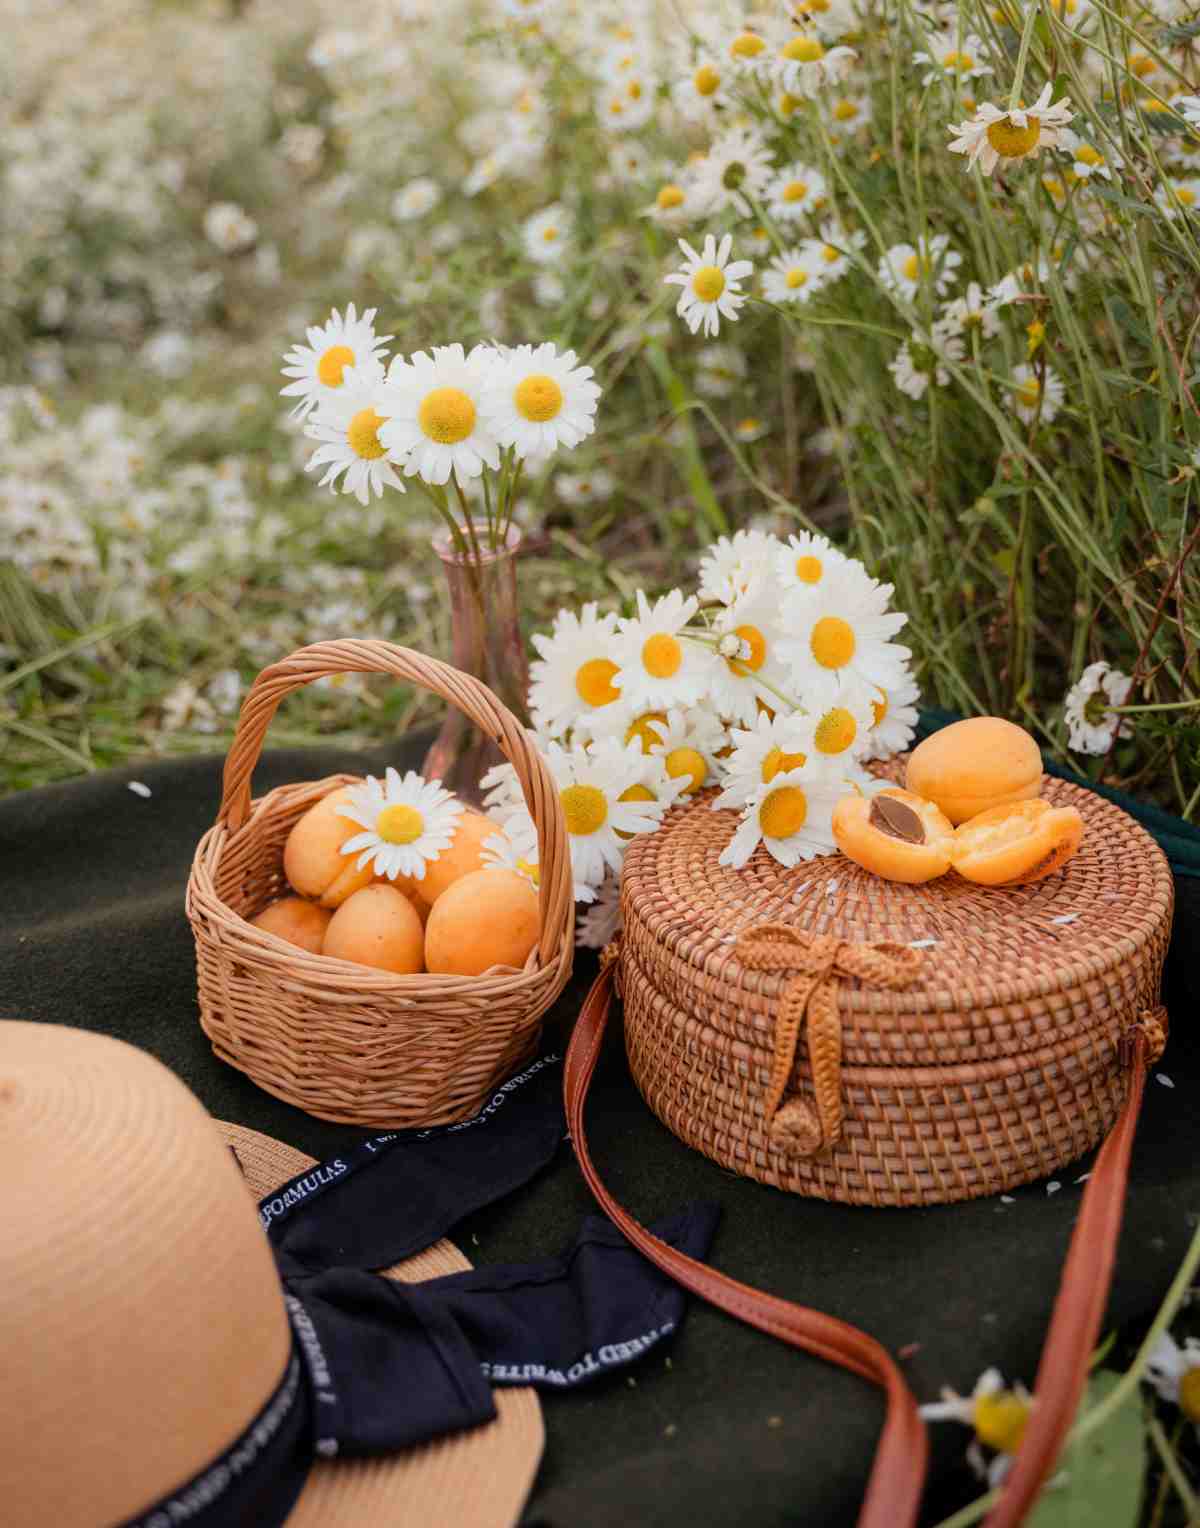 A black blanket in a field of daisies with a basket of peaches, a hat and a wicker handbag on it.